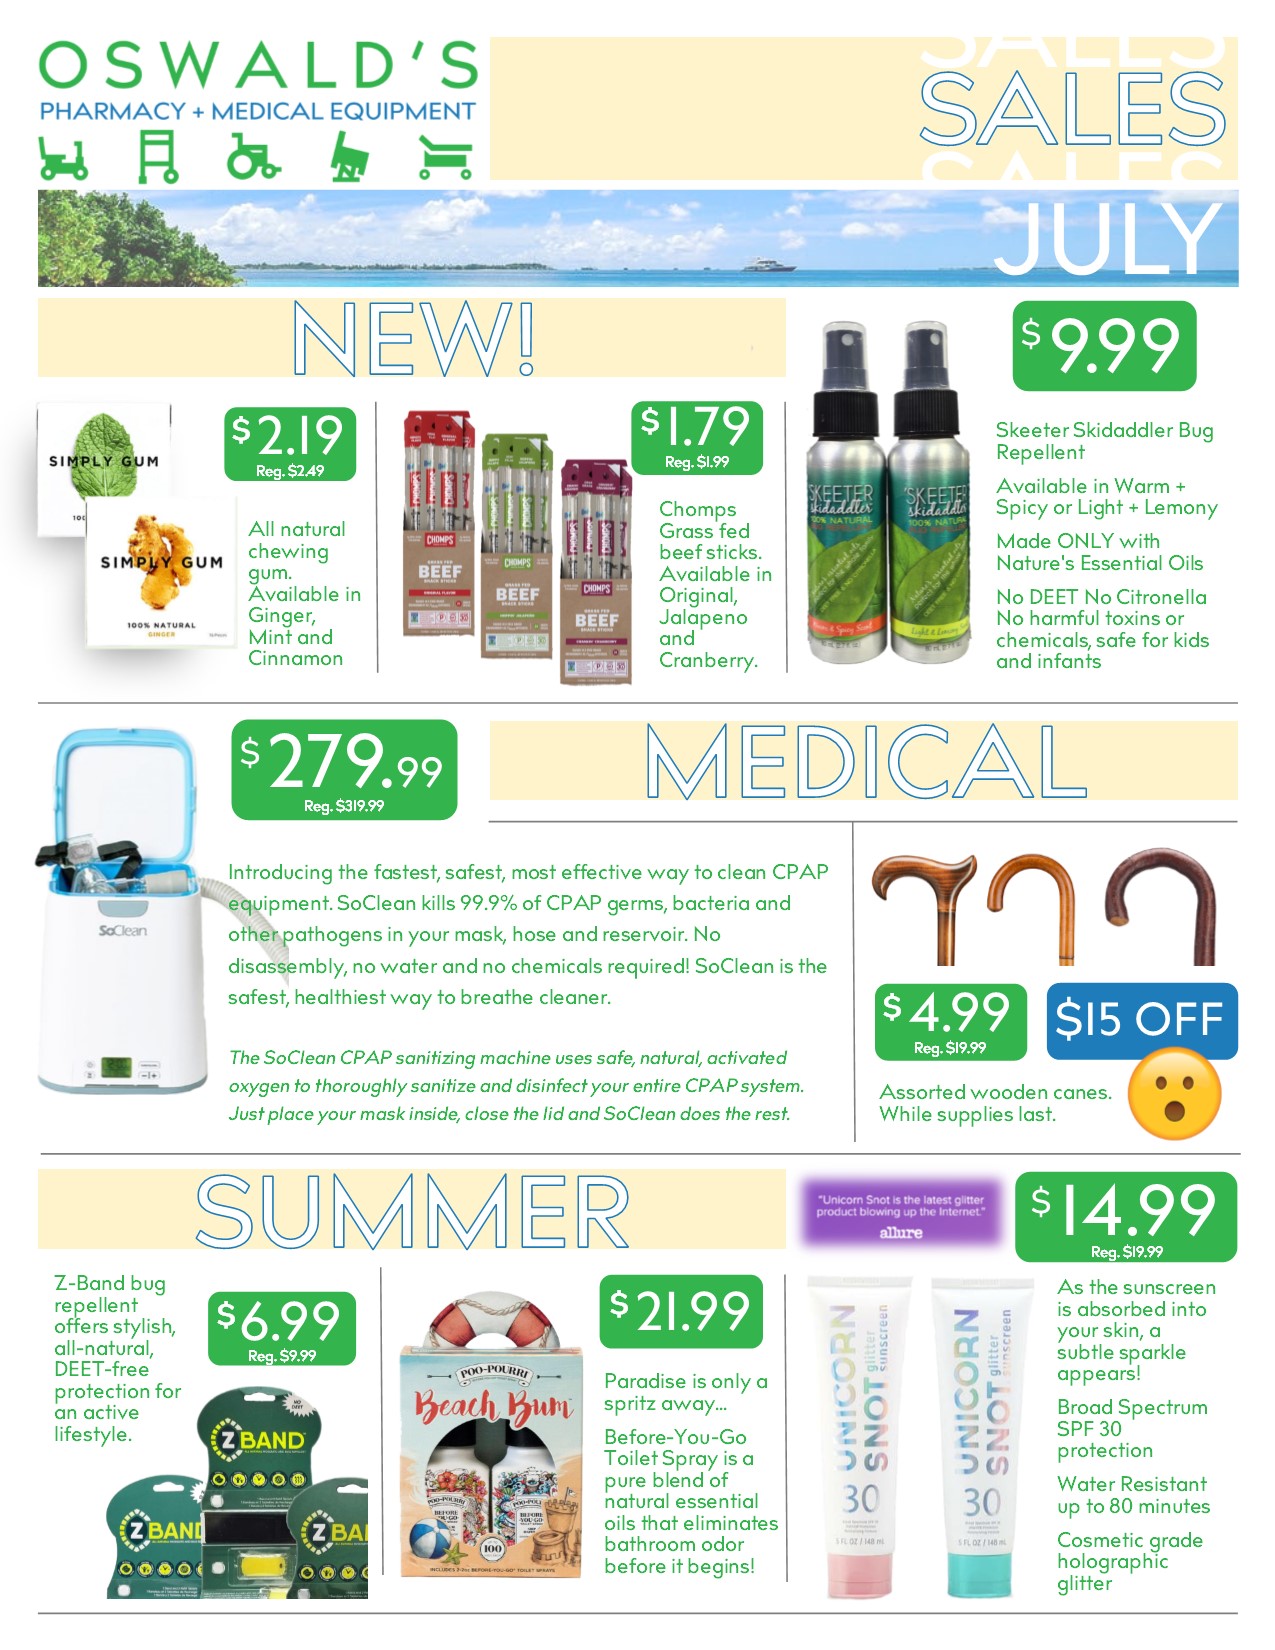 The Oswald's Promotions flyer from July 2018. Focuses on Sidewalk sale deals. Page 1.